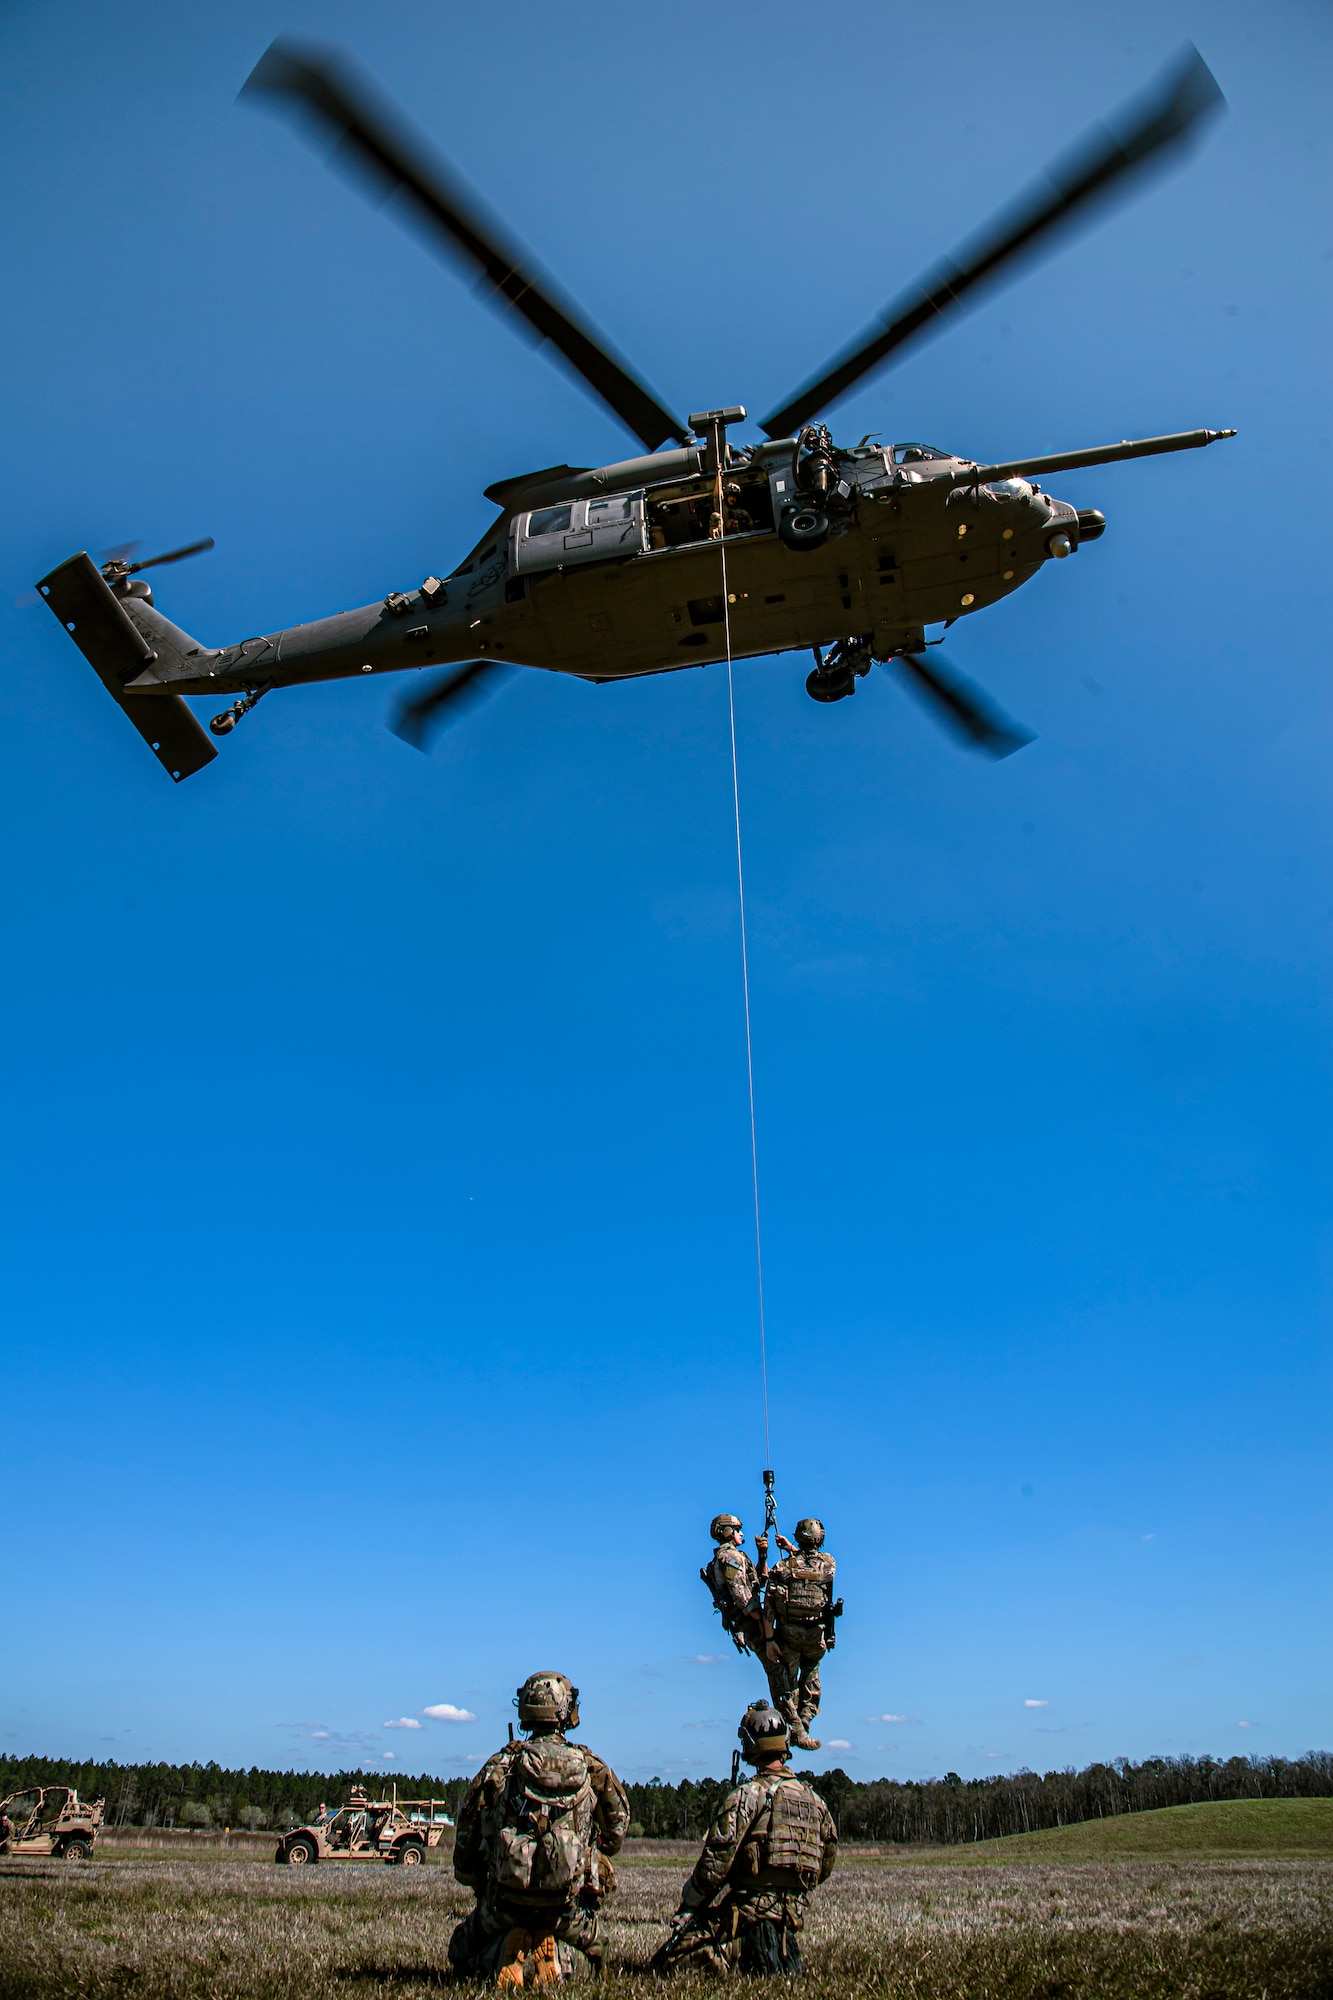 Photo of Airmen on a hoist connected to a hovering helicopter